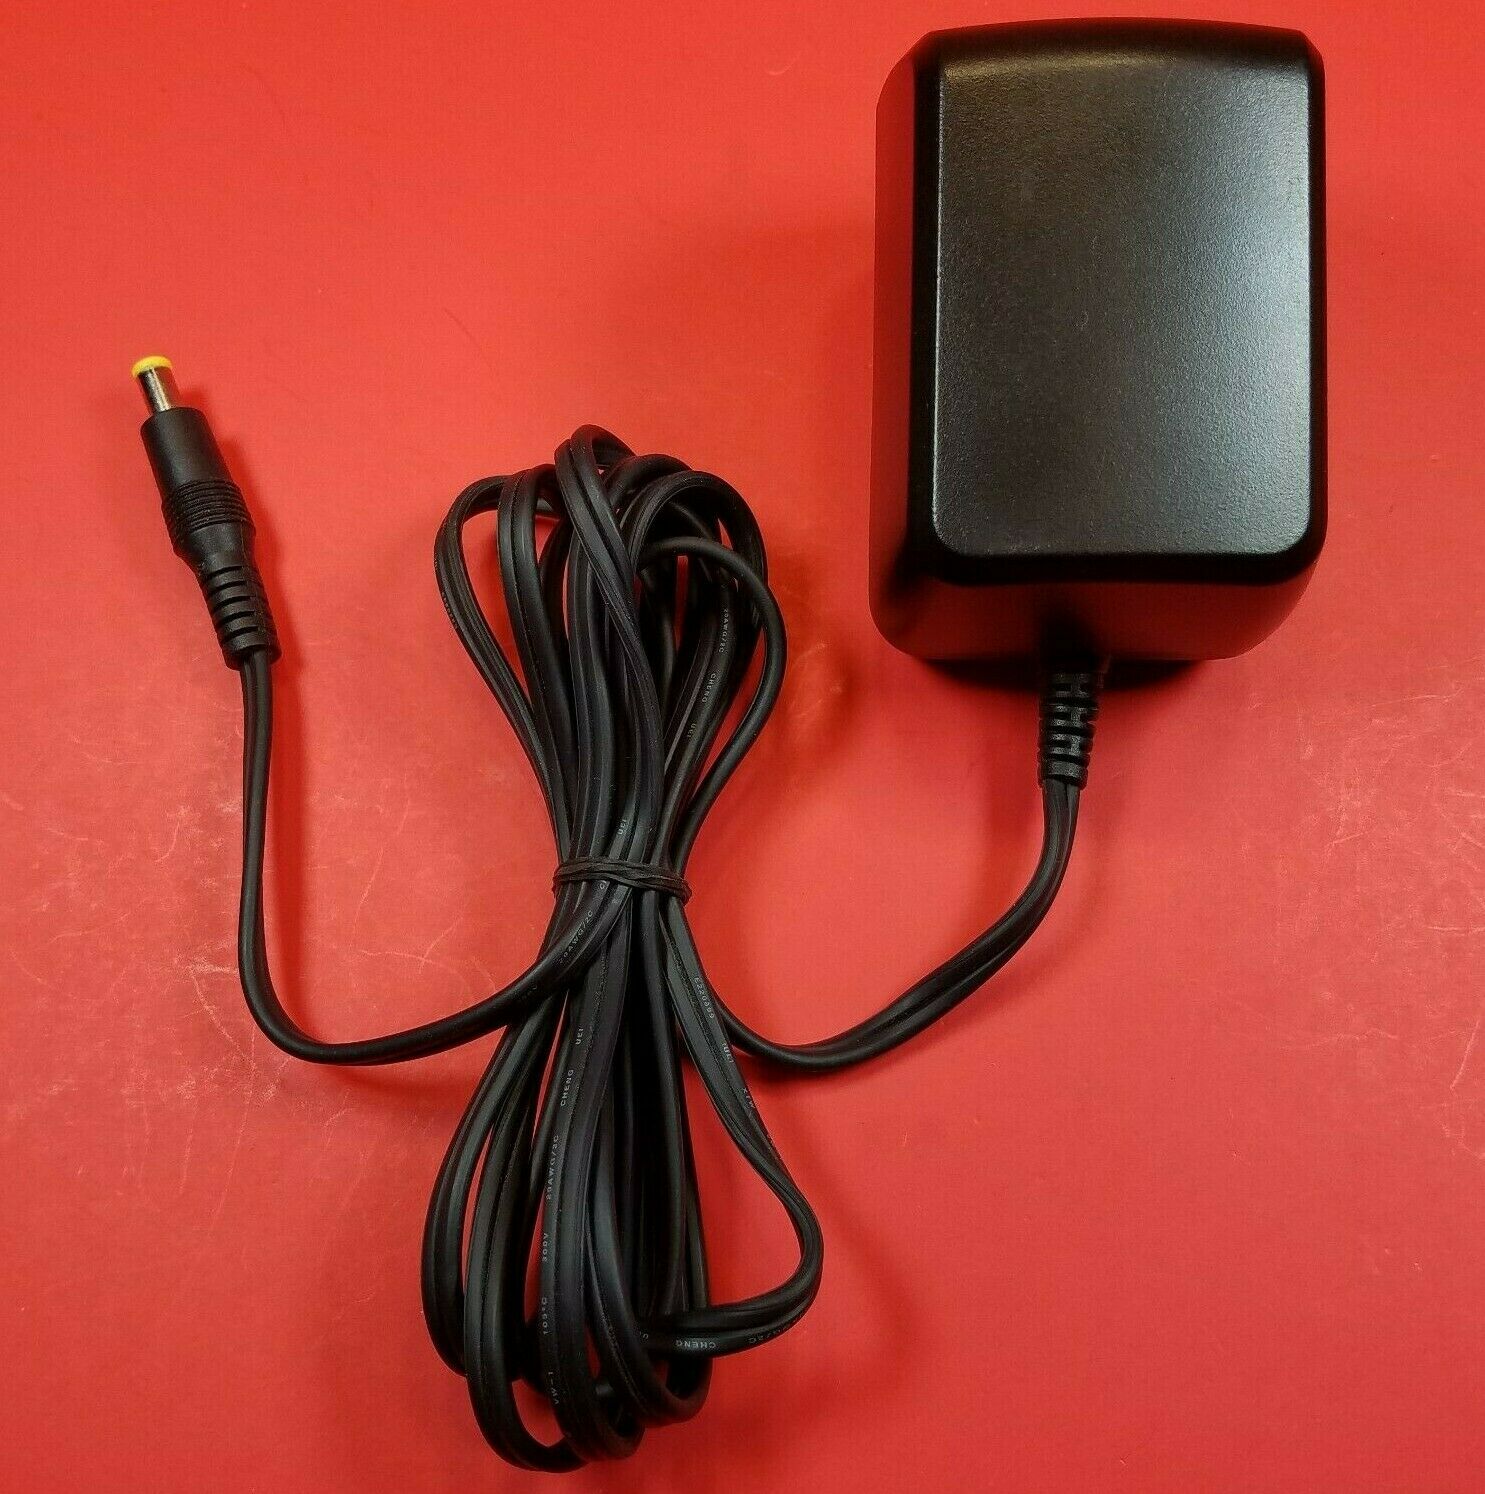 AC Adapter Charger For Wireless Speaker System SRS-BTX300 BLK WC BC Power Cord 100% Brand New, AC to DC High Quality P